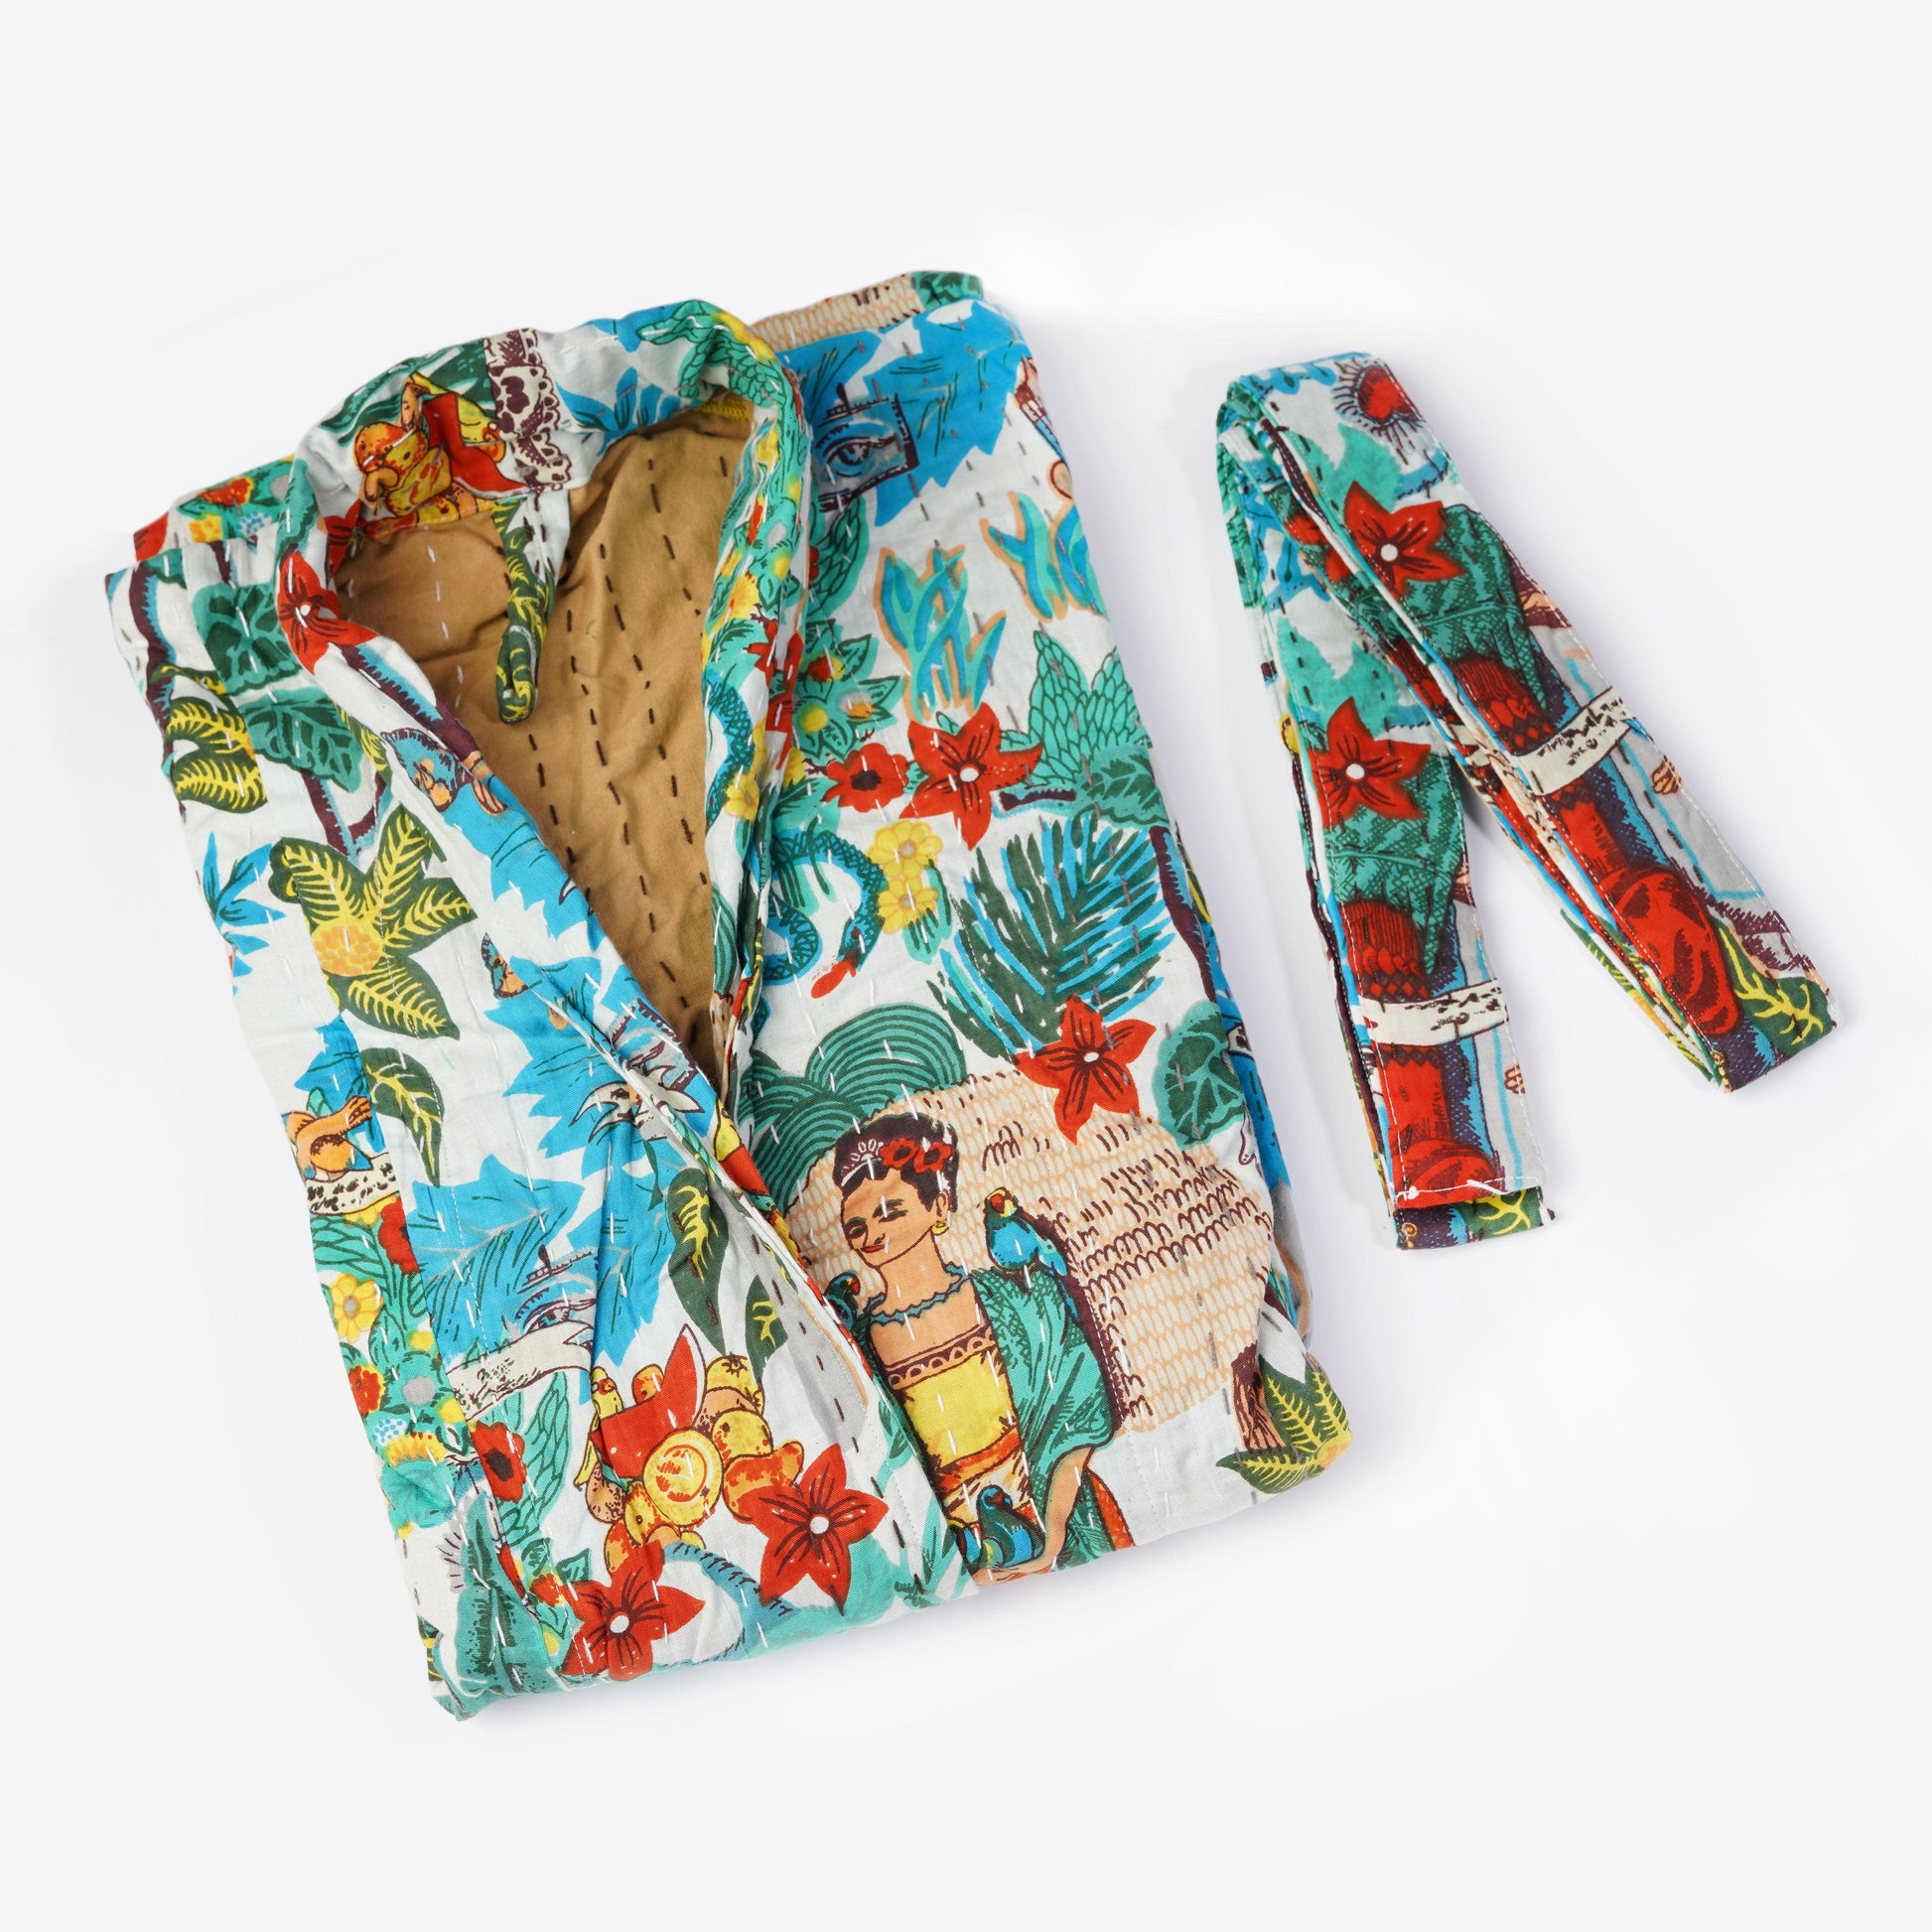 Frida Kahlo Kantha Quilted Kimono Bath Robes/ Night Suit -White - The Teal Thread